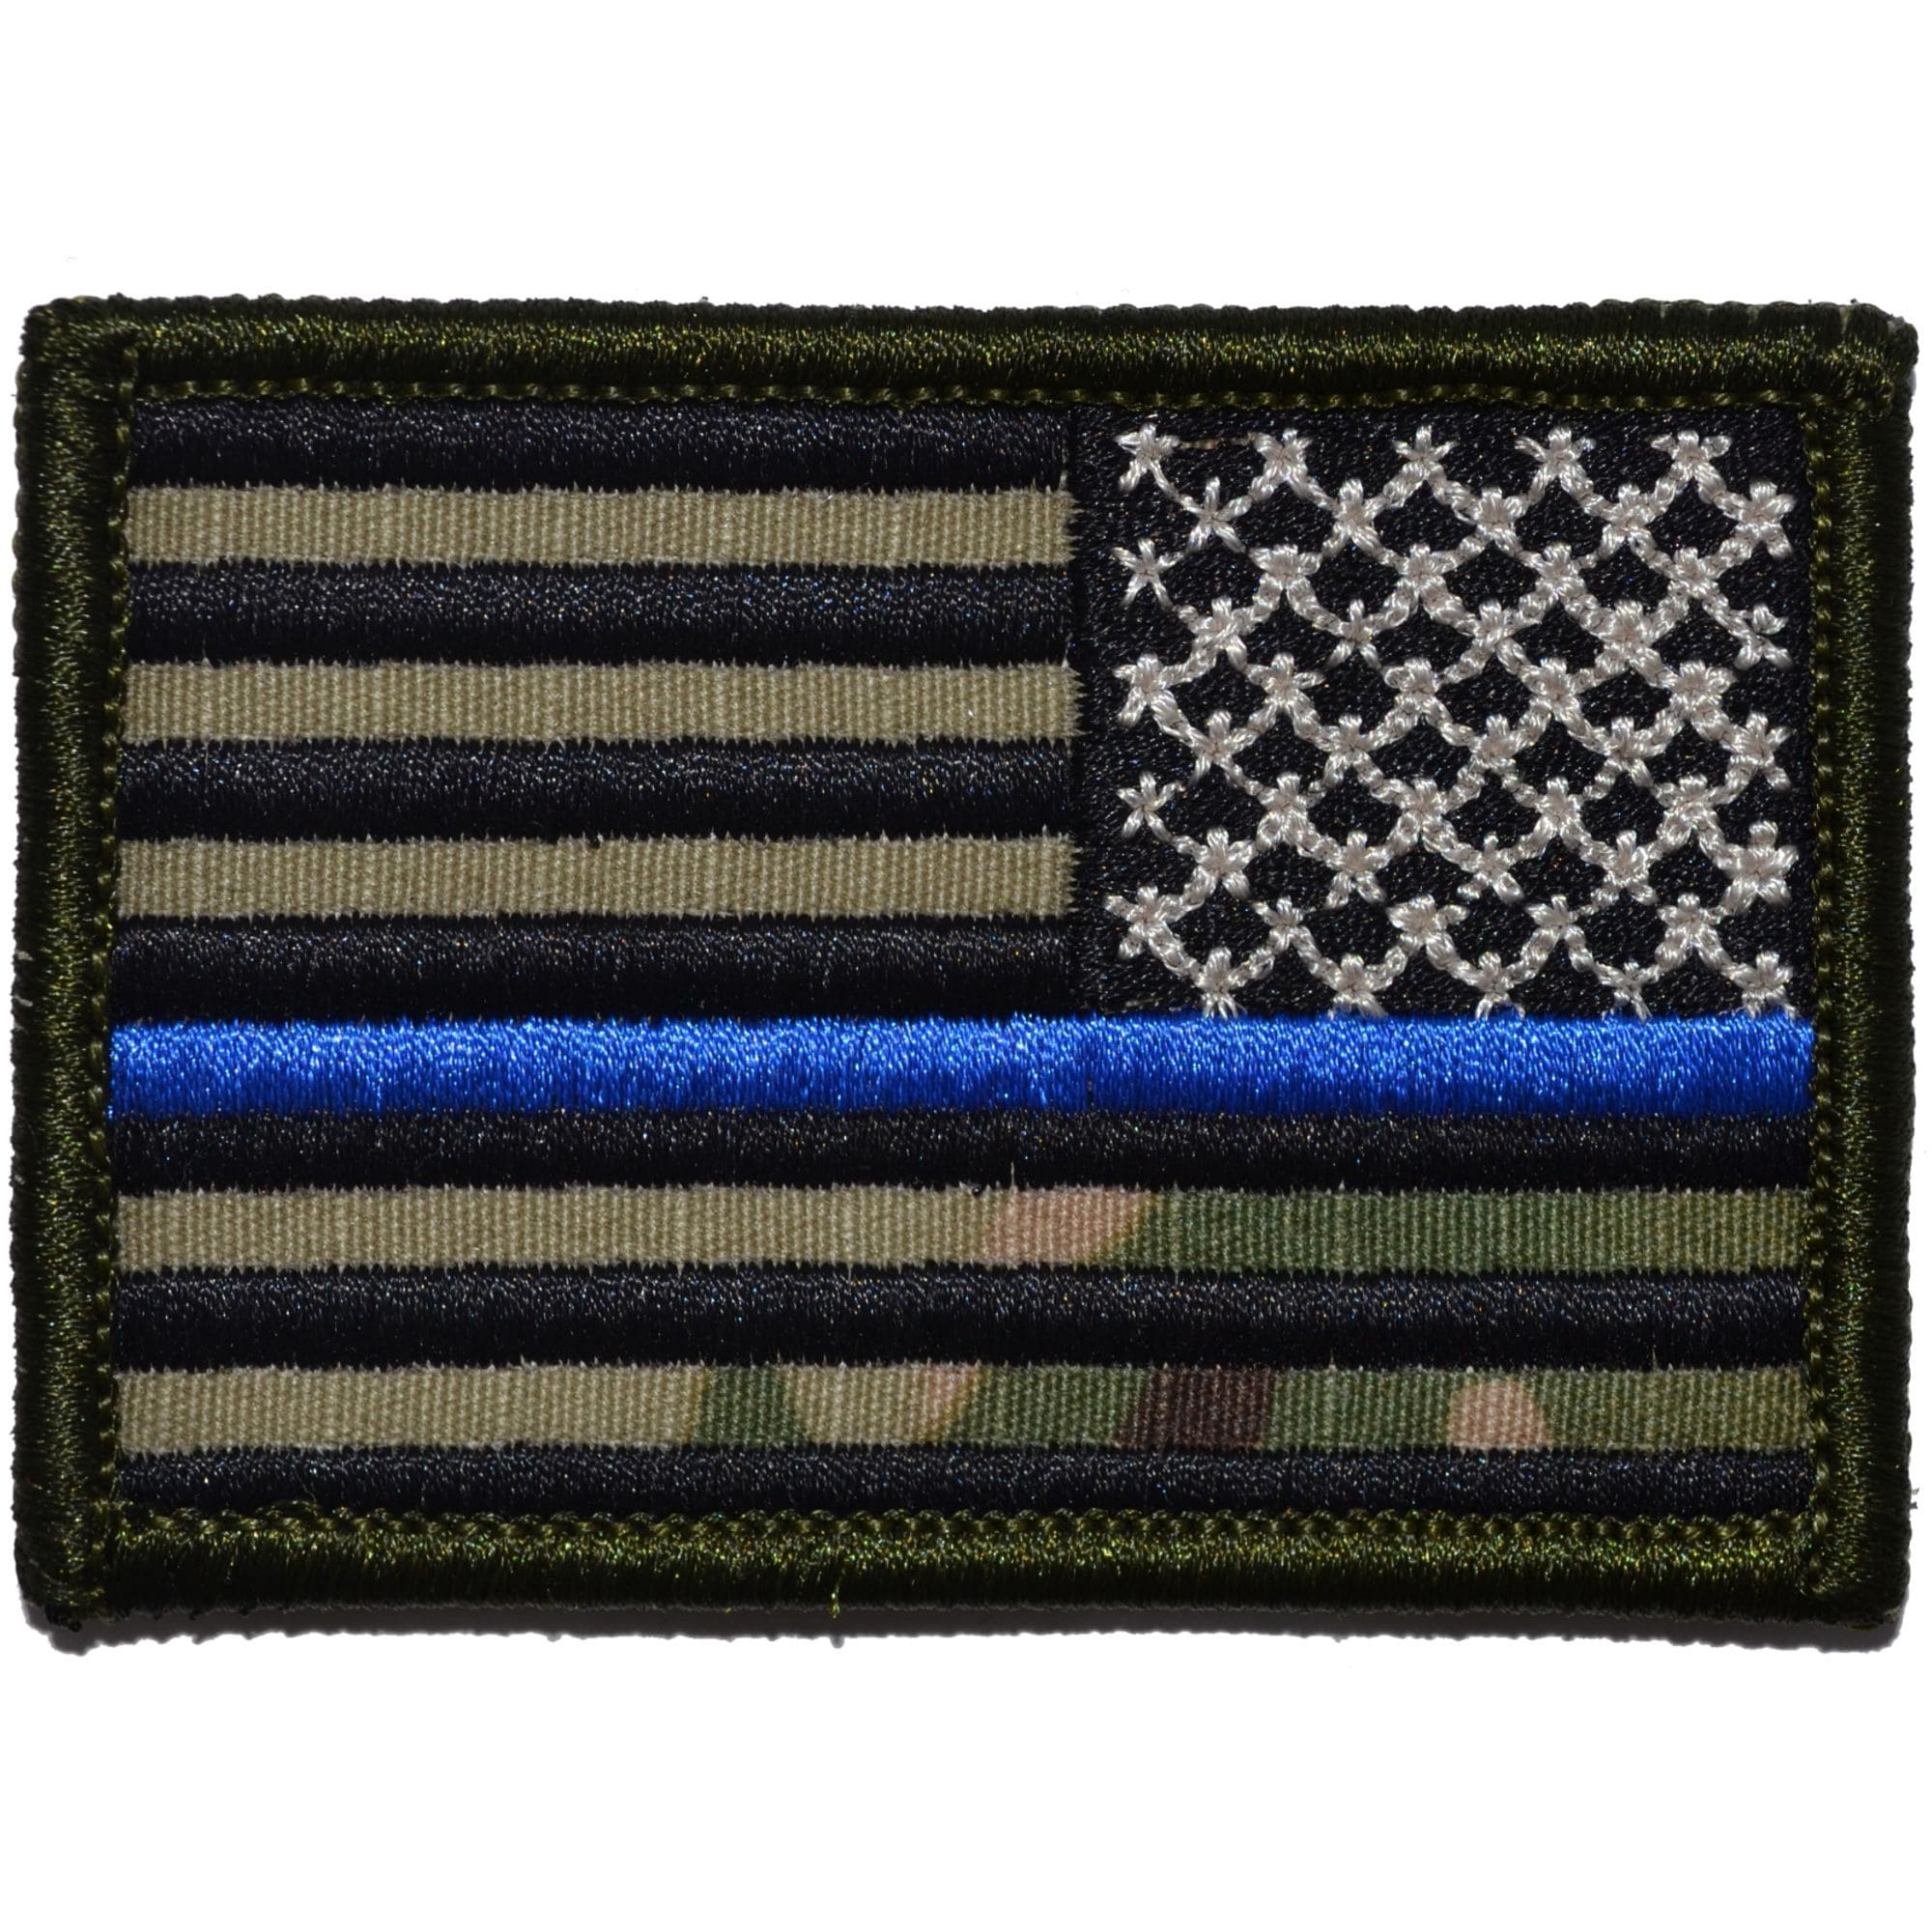 Tactical Gear Junkie Patches MultiCam Reverse Thin Blue Line Police USA Flag - 2x3 Patch